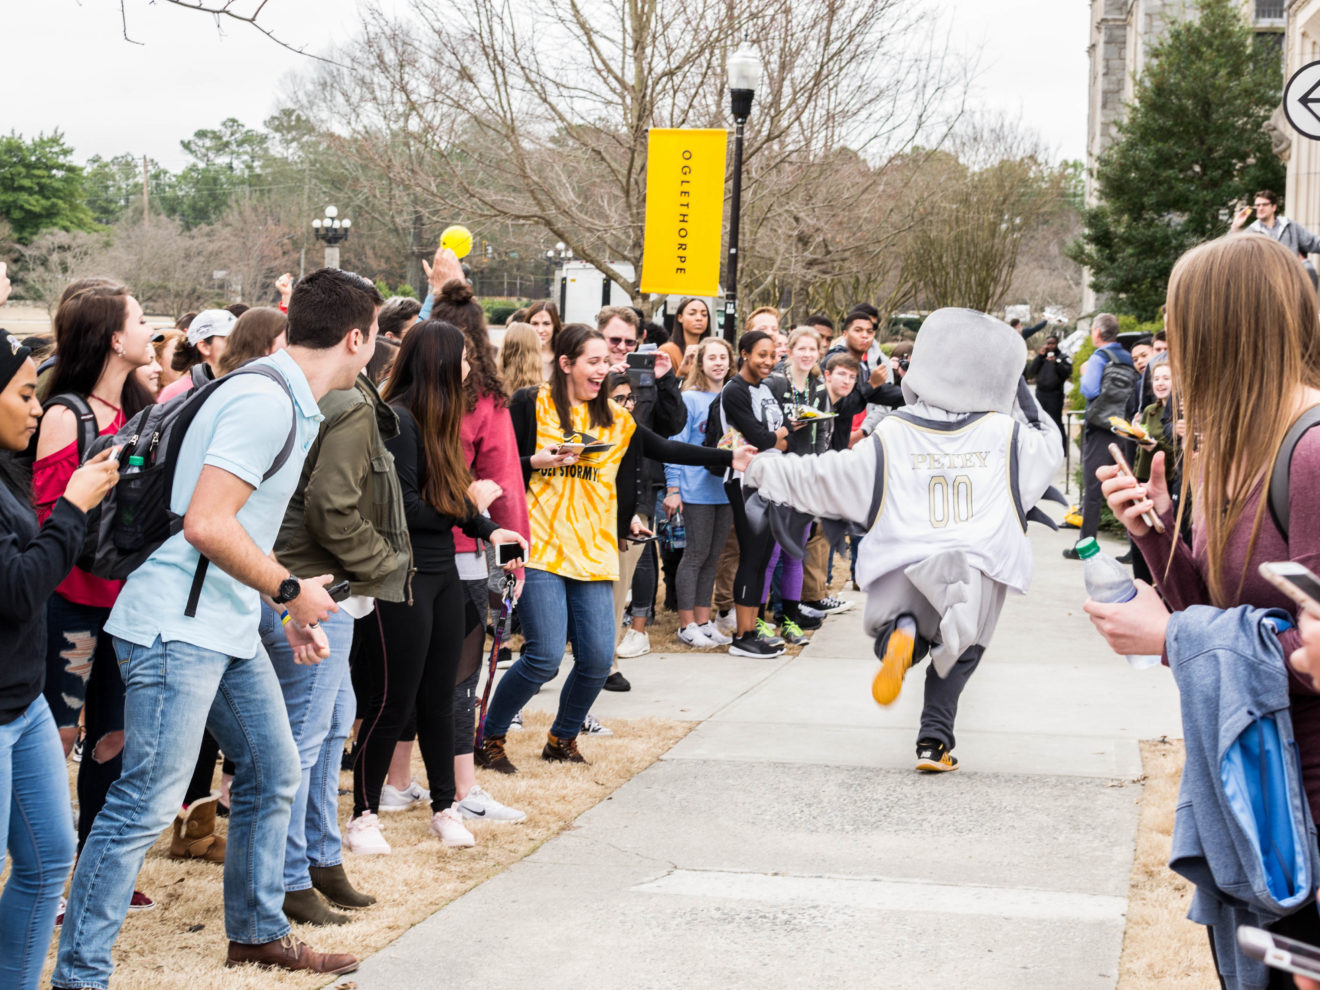 Petey high-fives a student at the annual Petrels of Fire footrace